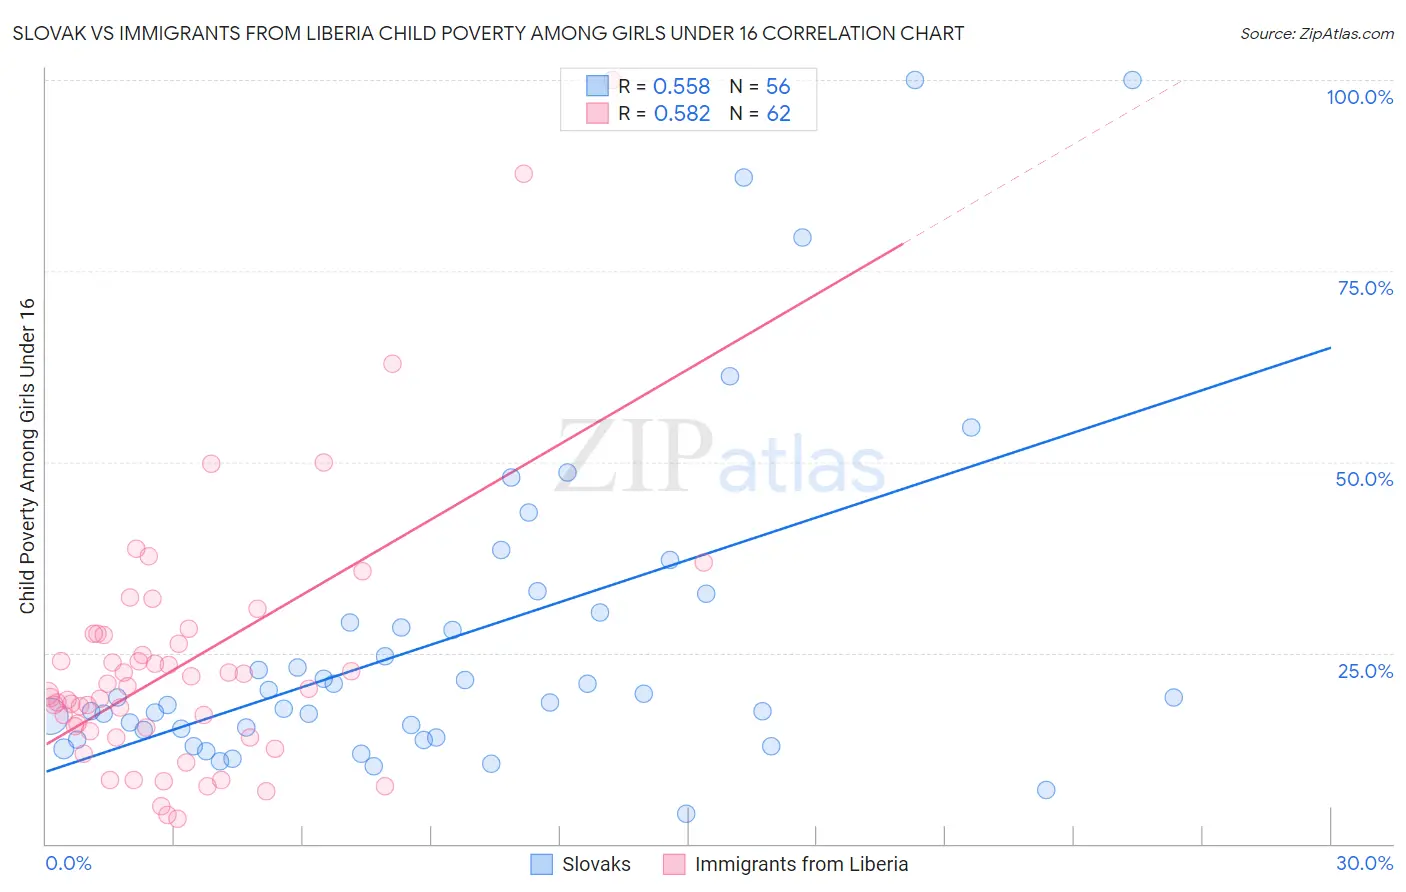 Slovak vs Immigrants from Liberia Child Poverty Among Girls Under 16